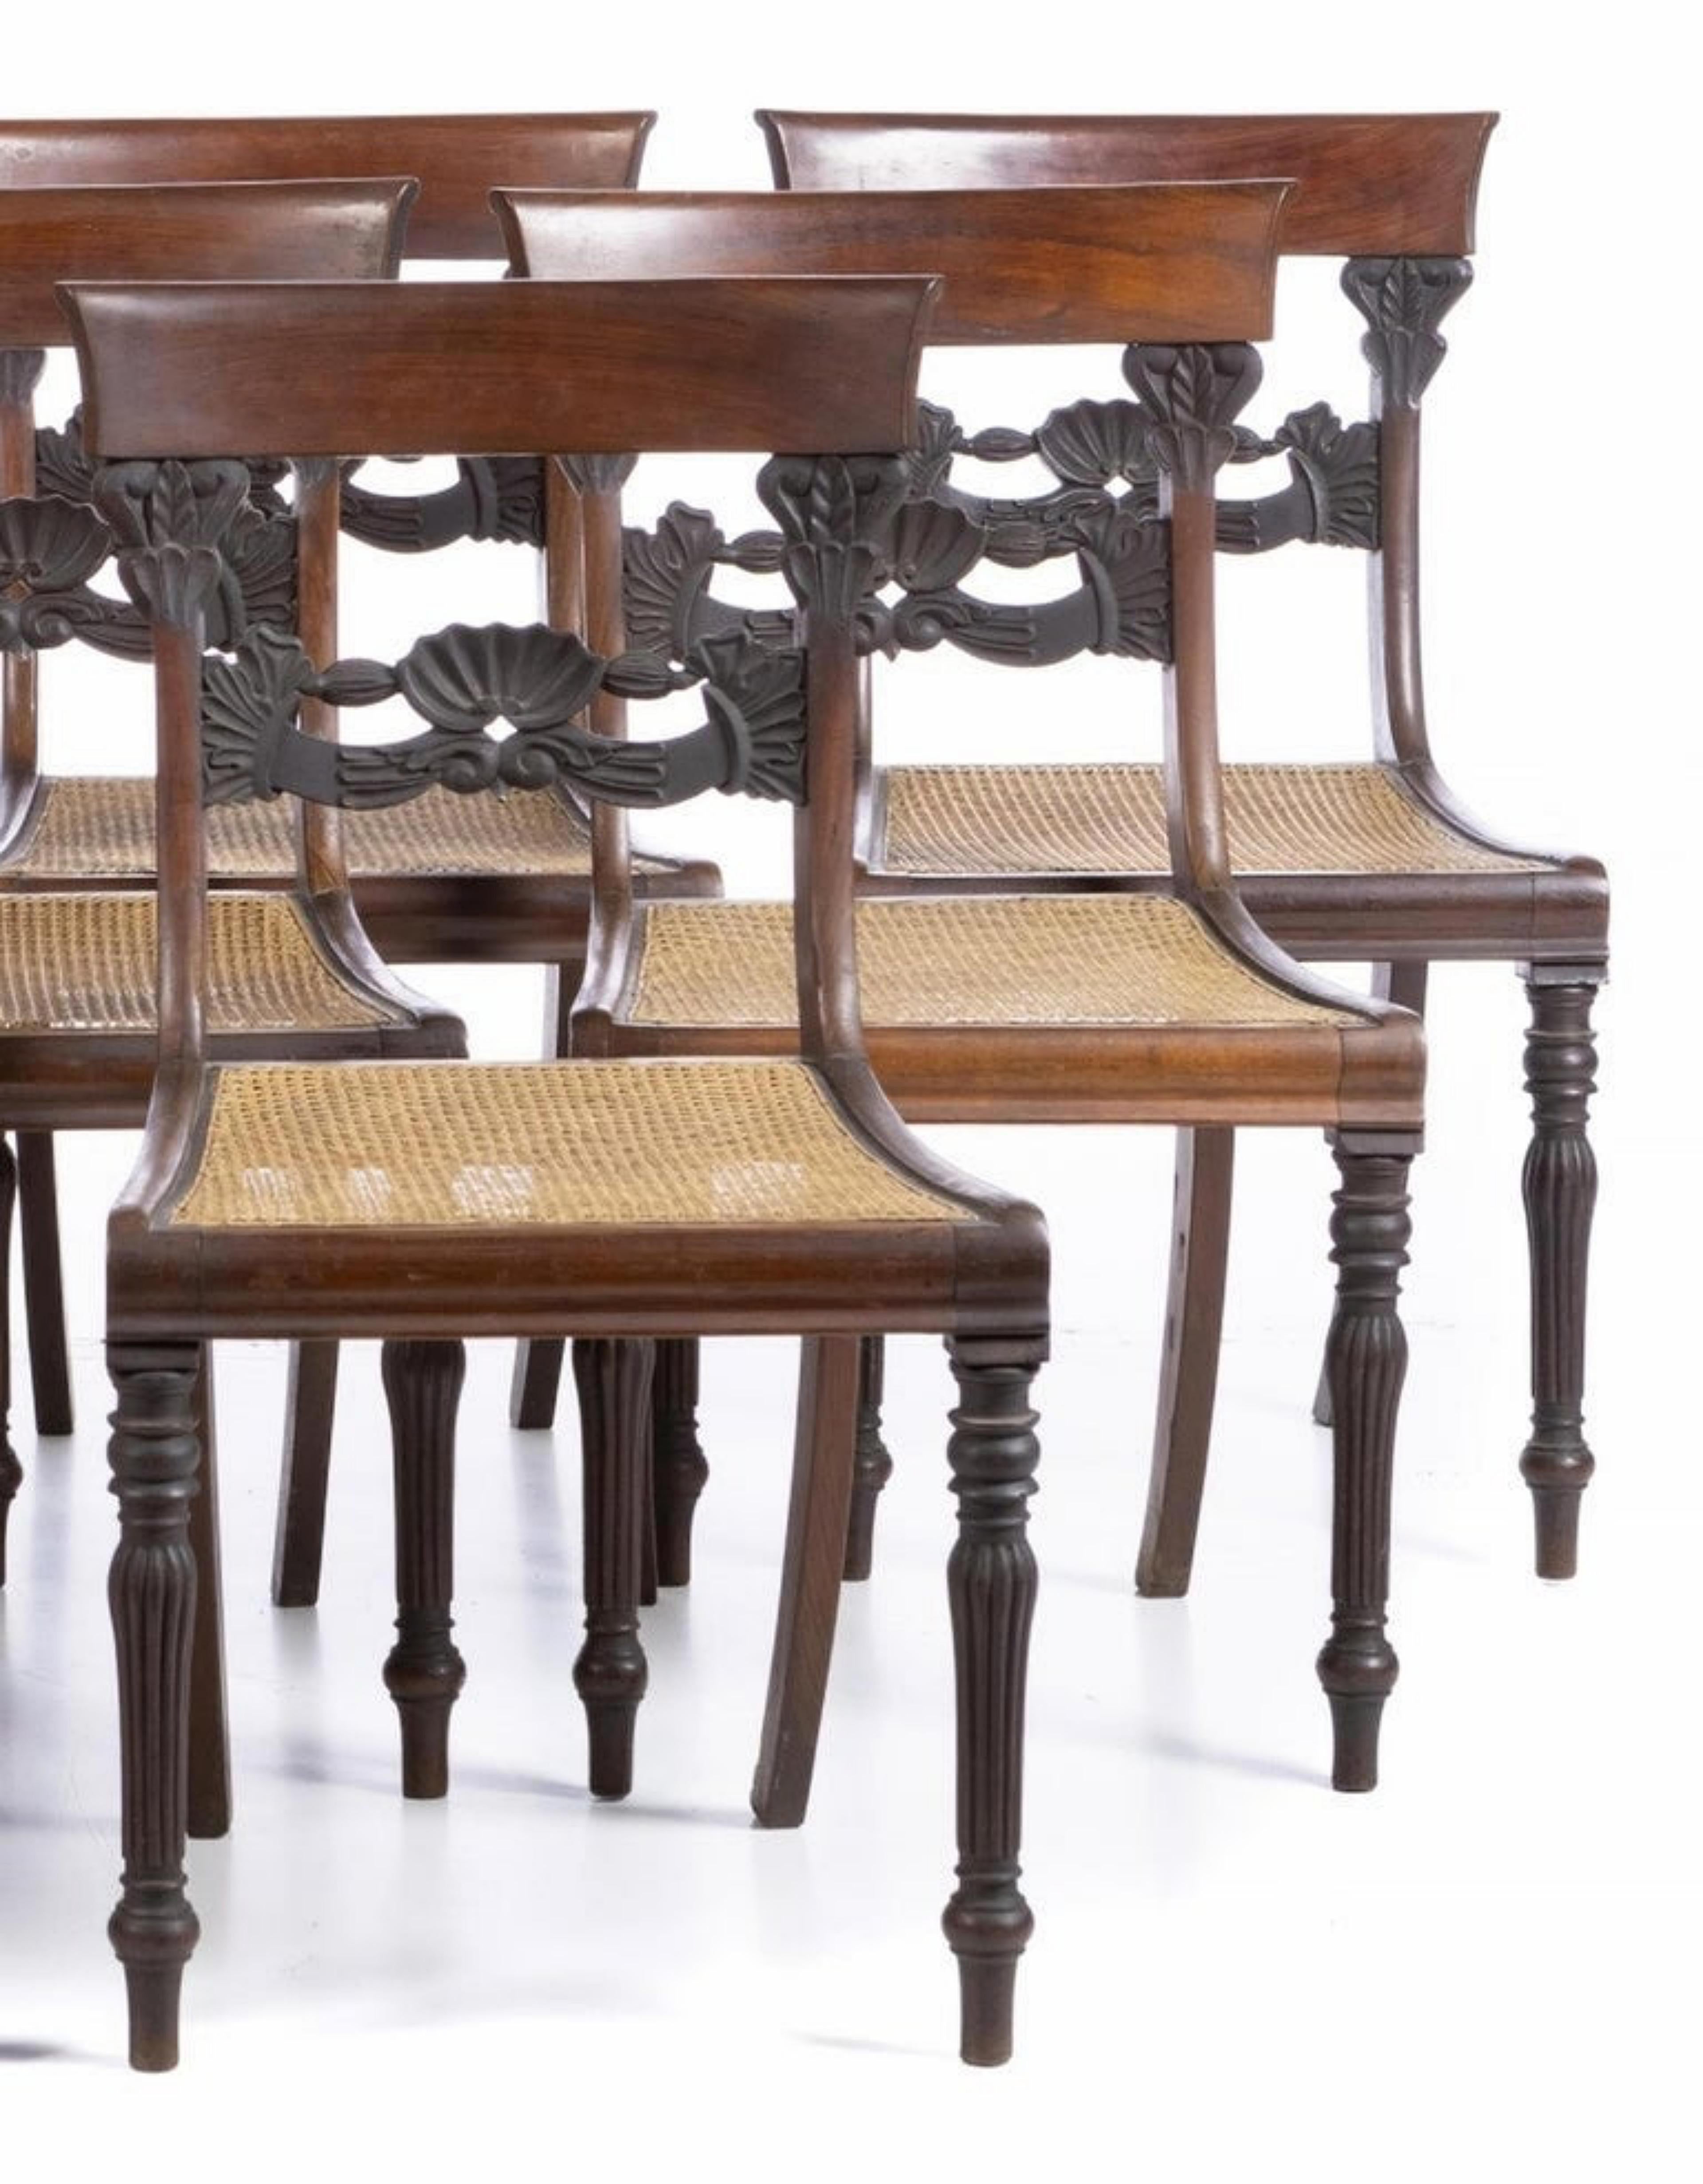 Set of 9 chairs
Portuguese, 19th century in oilwood wood, cane seats, hollow back. 
Small defects and signs of use. 
Dimension: 88 x 47 x 43 cm.